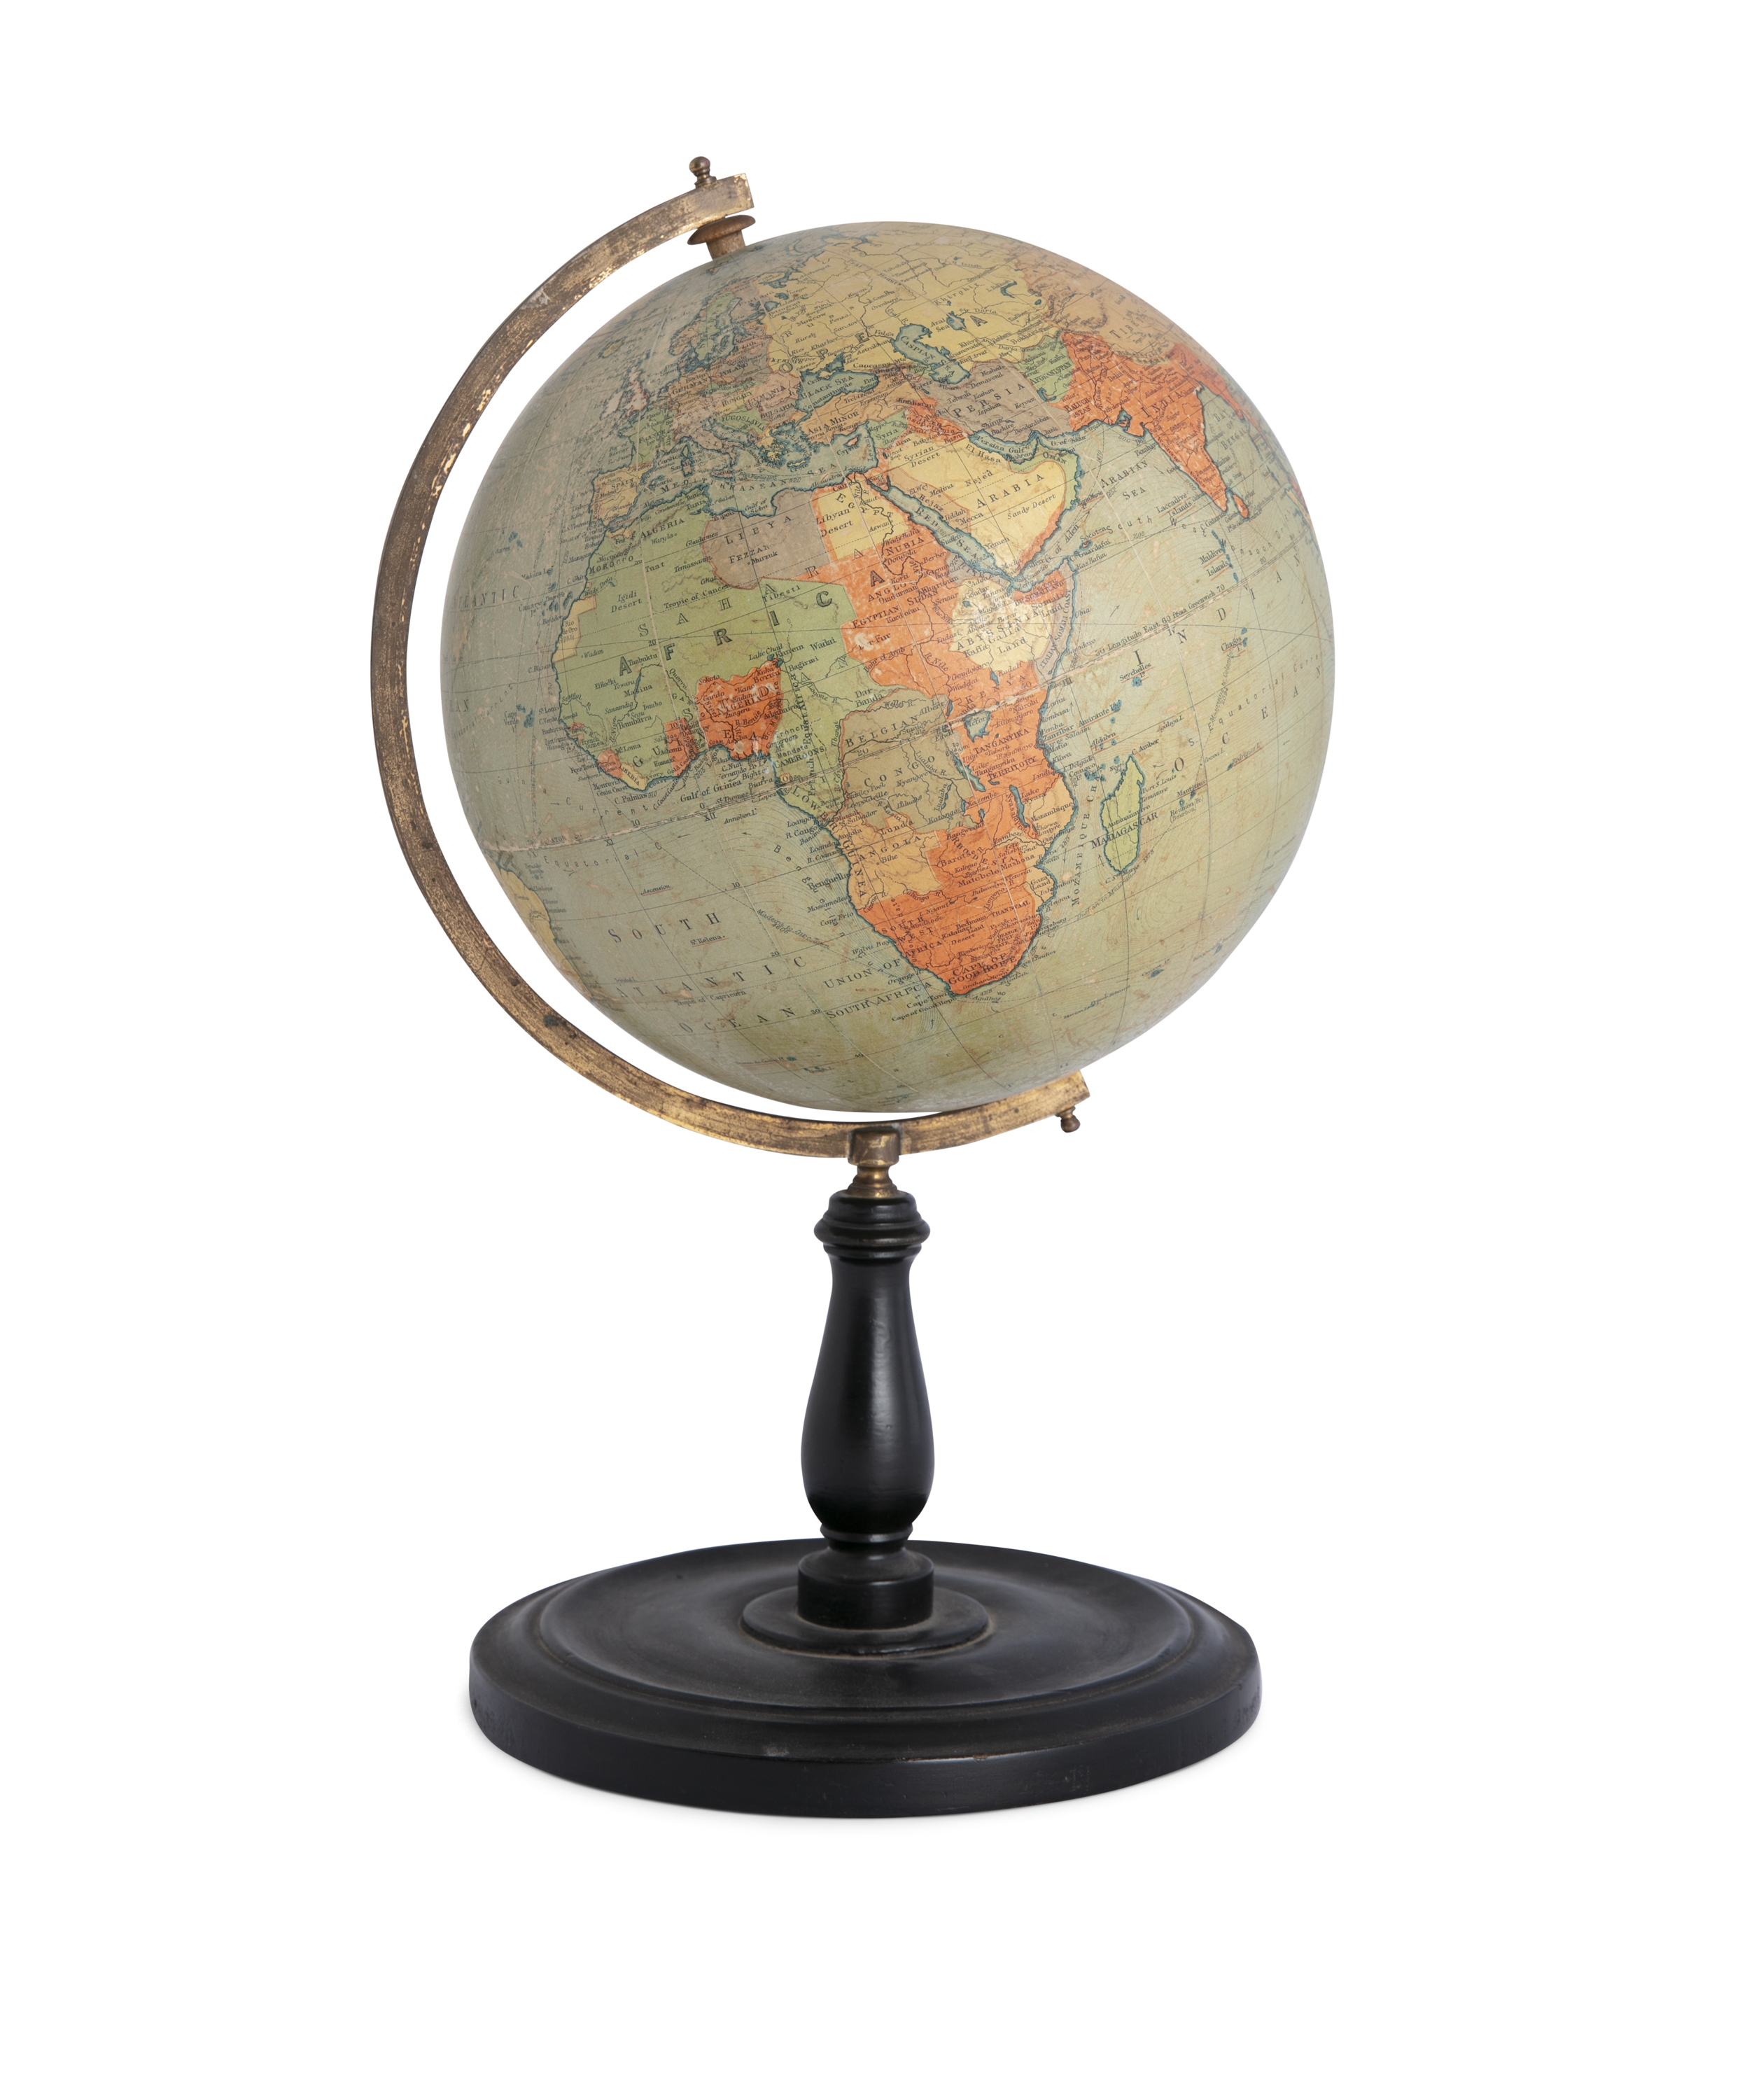 A PHILIPS 9 TERRESTRIAL GLOBE, early 20th century, supported on an engraved brass arc, and turned